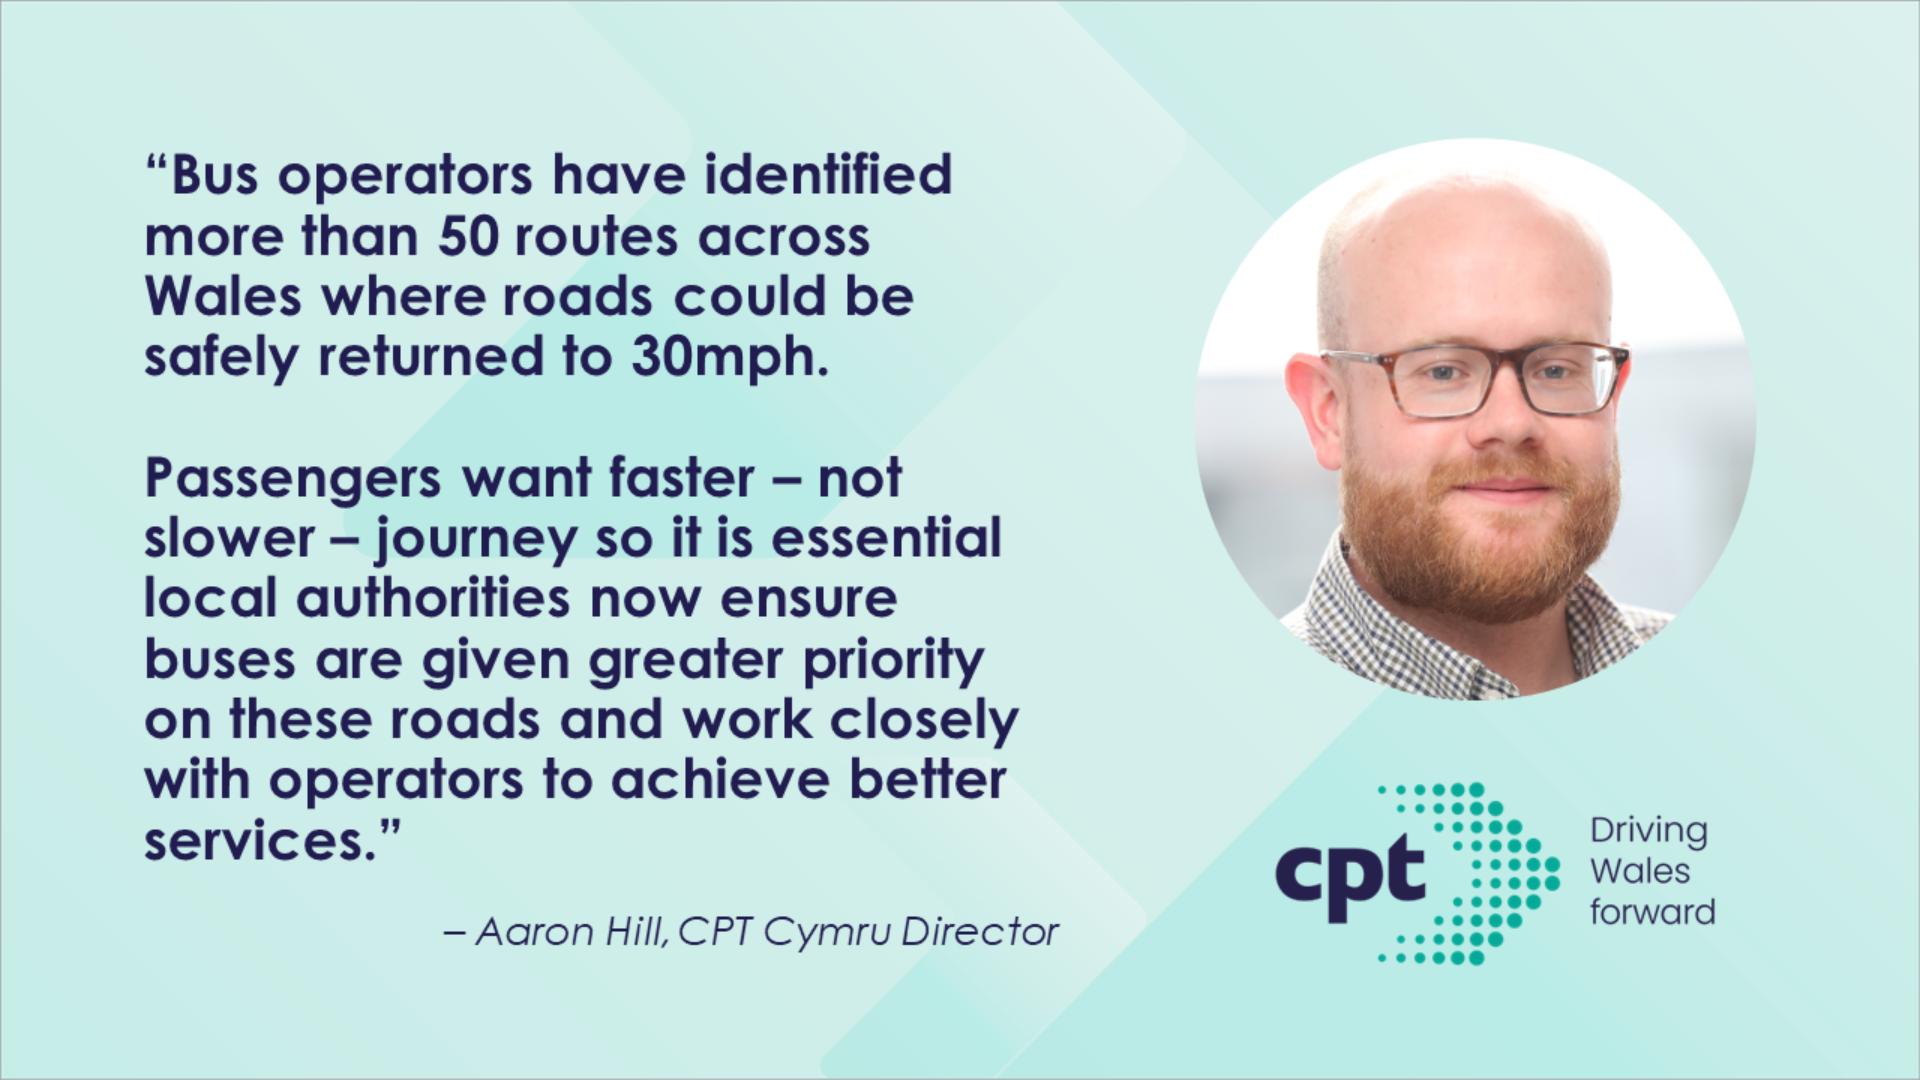 CPT welcomes Welsh 20mph guidance